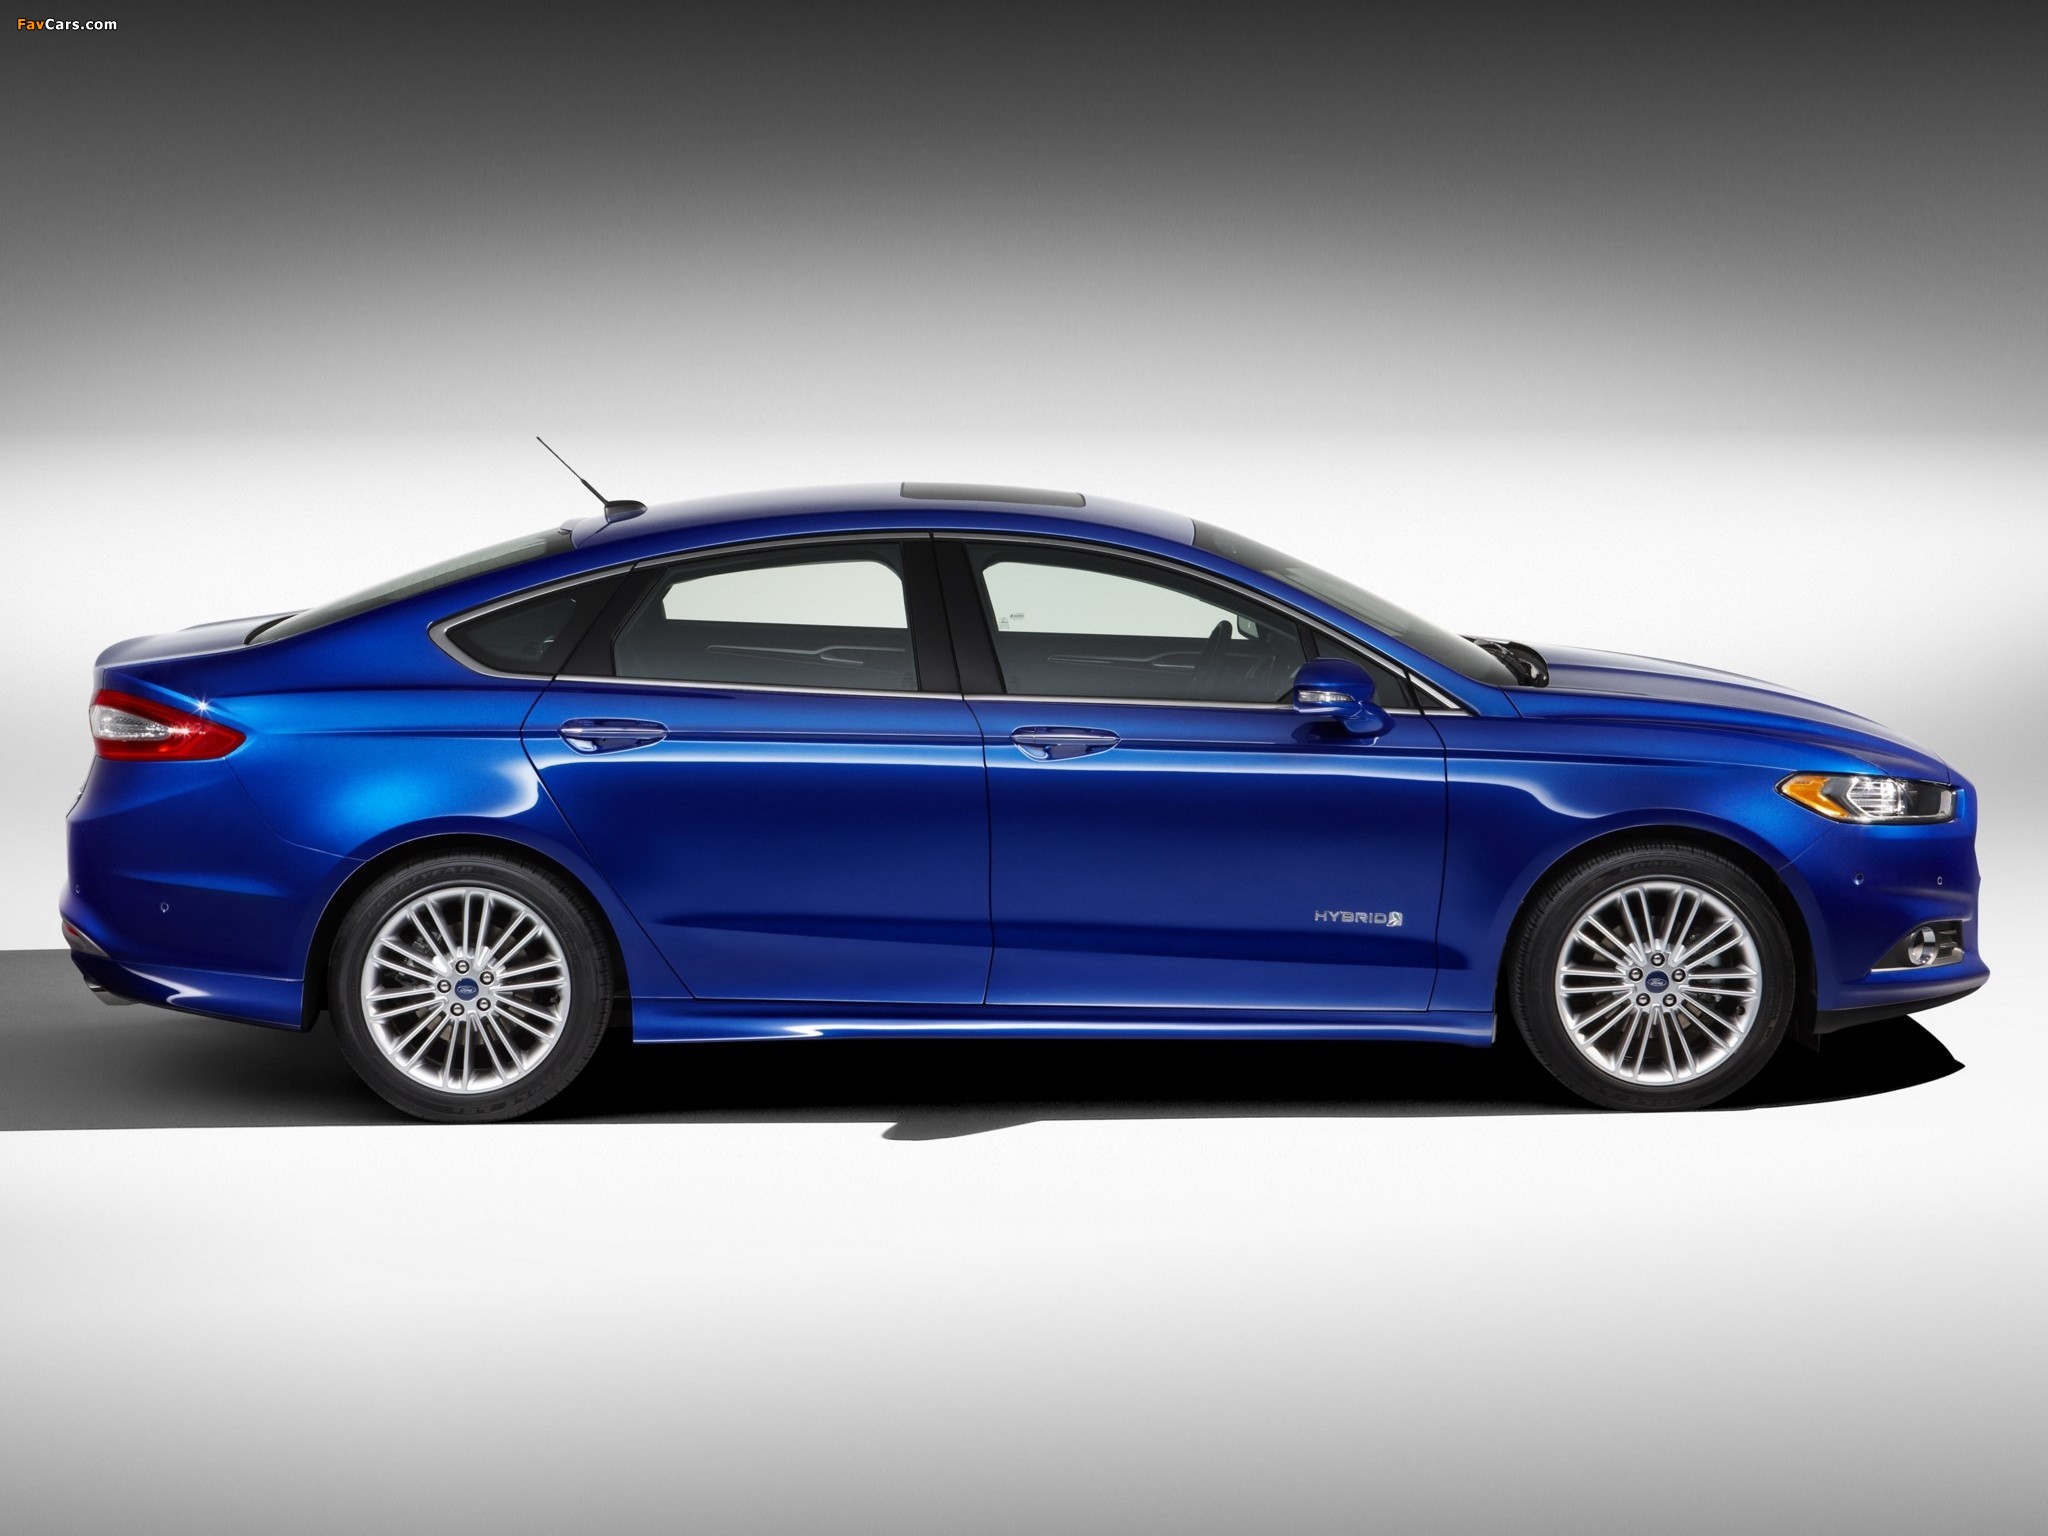 Mondeo 2014. Ford Fusion 2014 Hybrid. Форд Мондео 5. Ford Fusion Hybrid. Форд Мондео 5 седан.